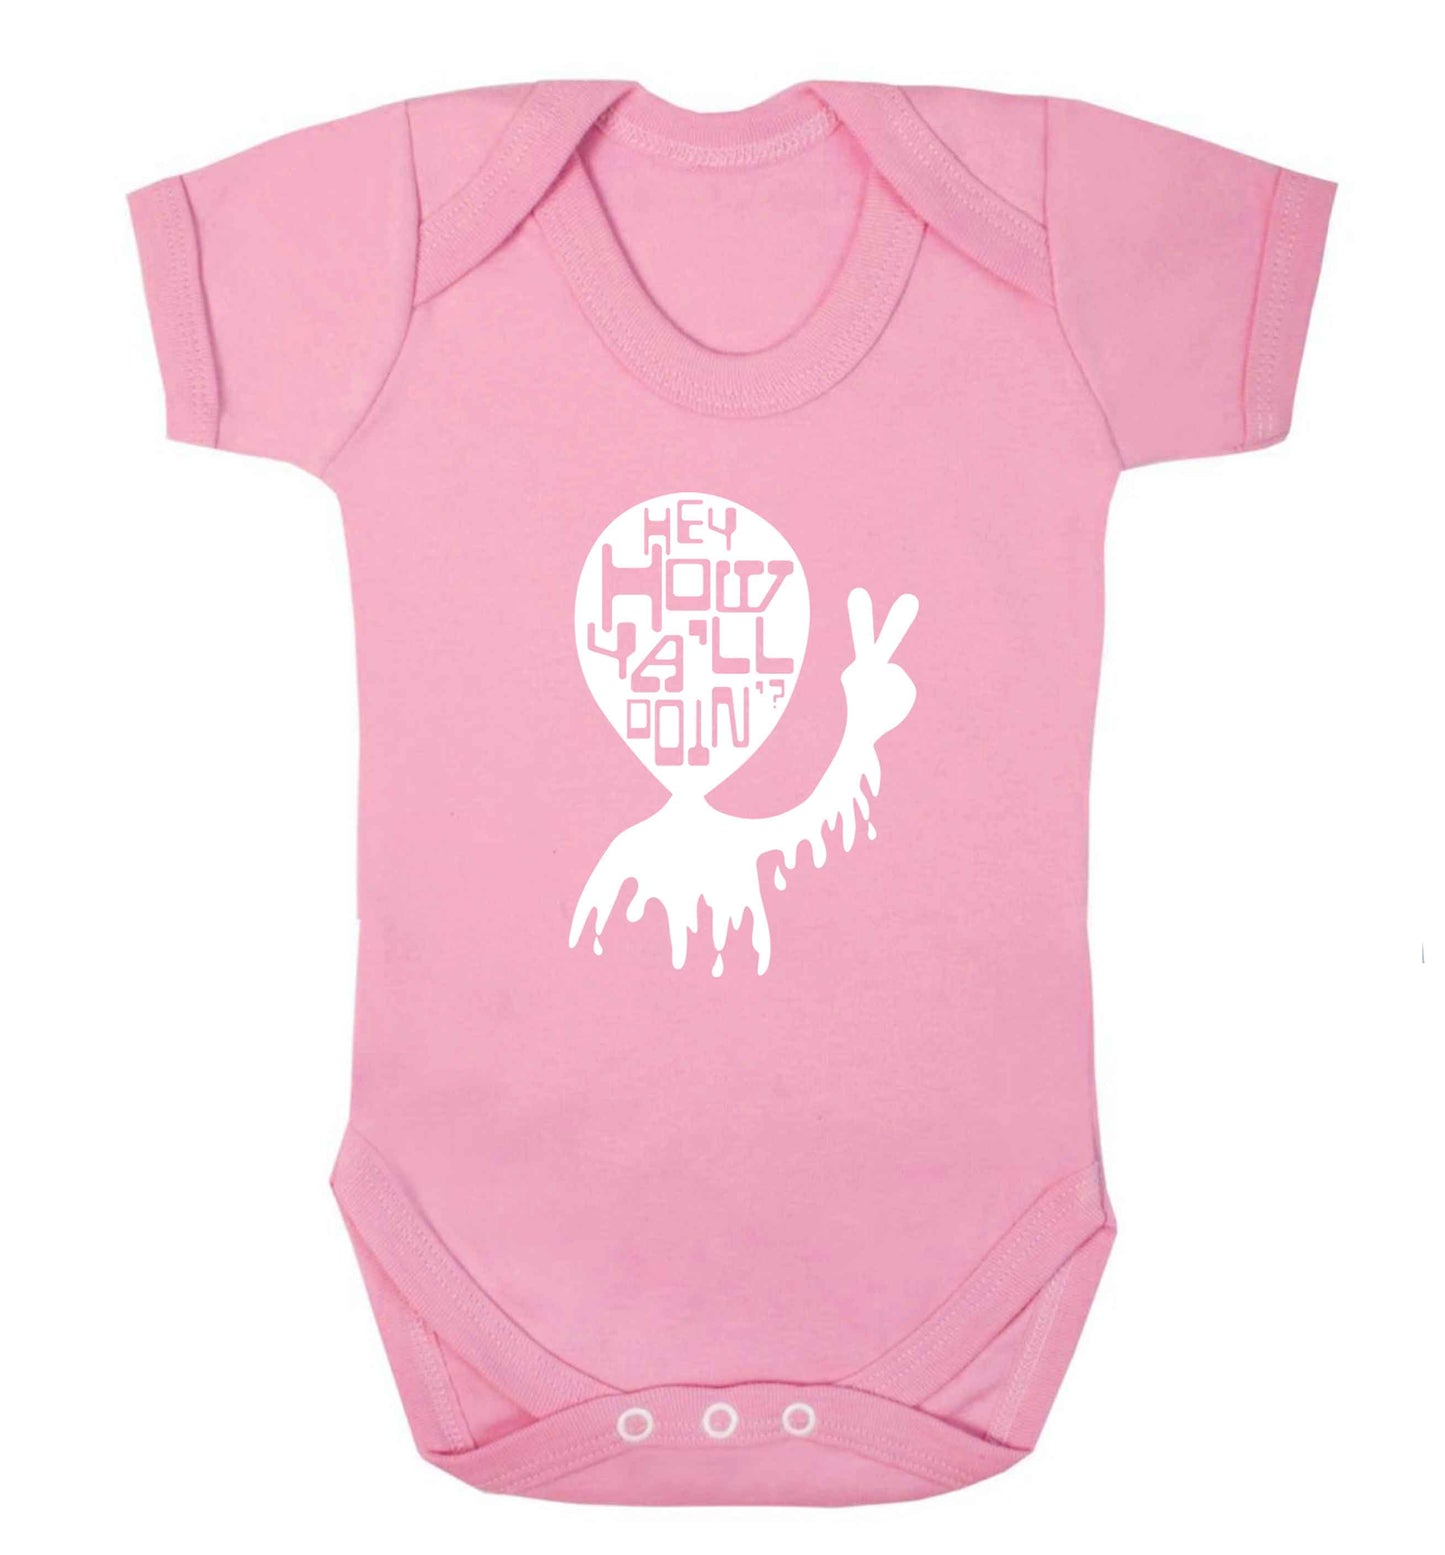 Misheard song lyrics - check!  baby vest pale pink 18-24 months